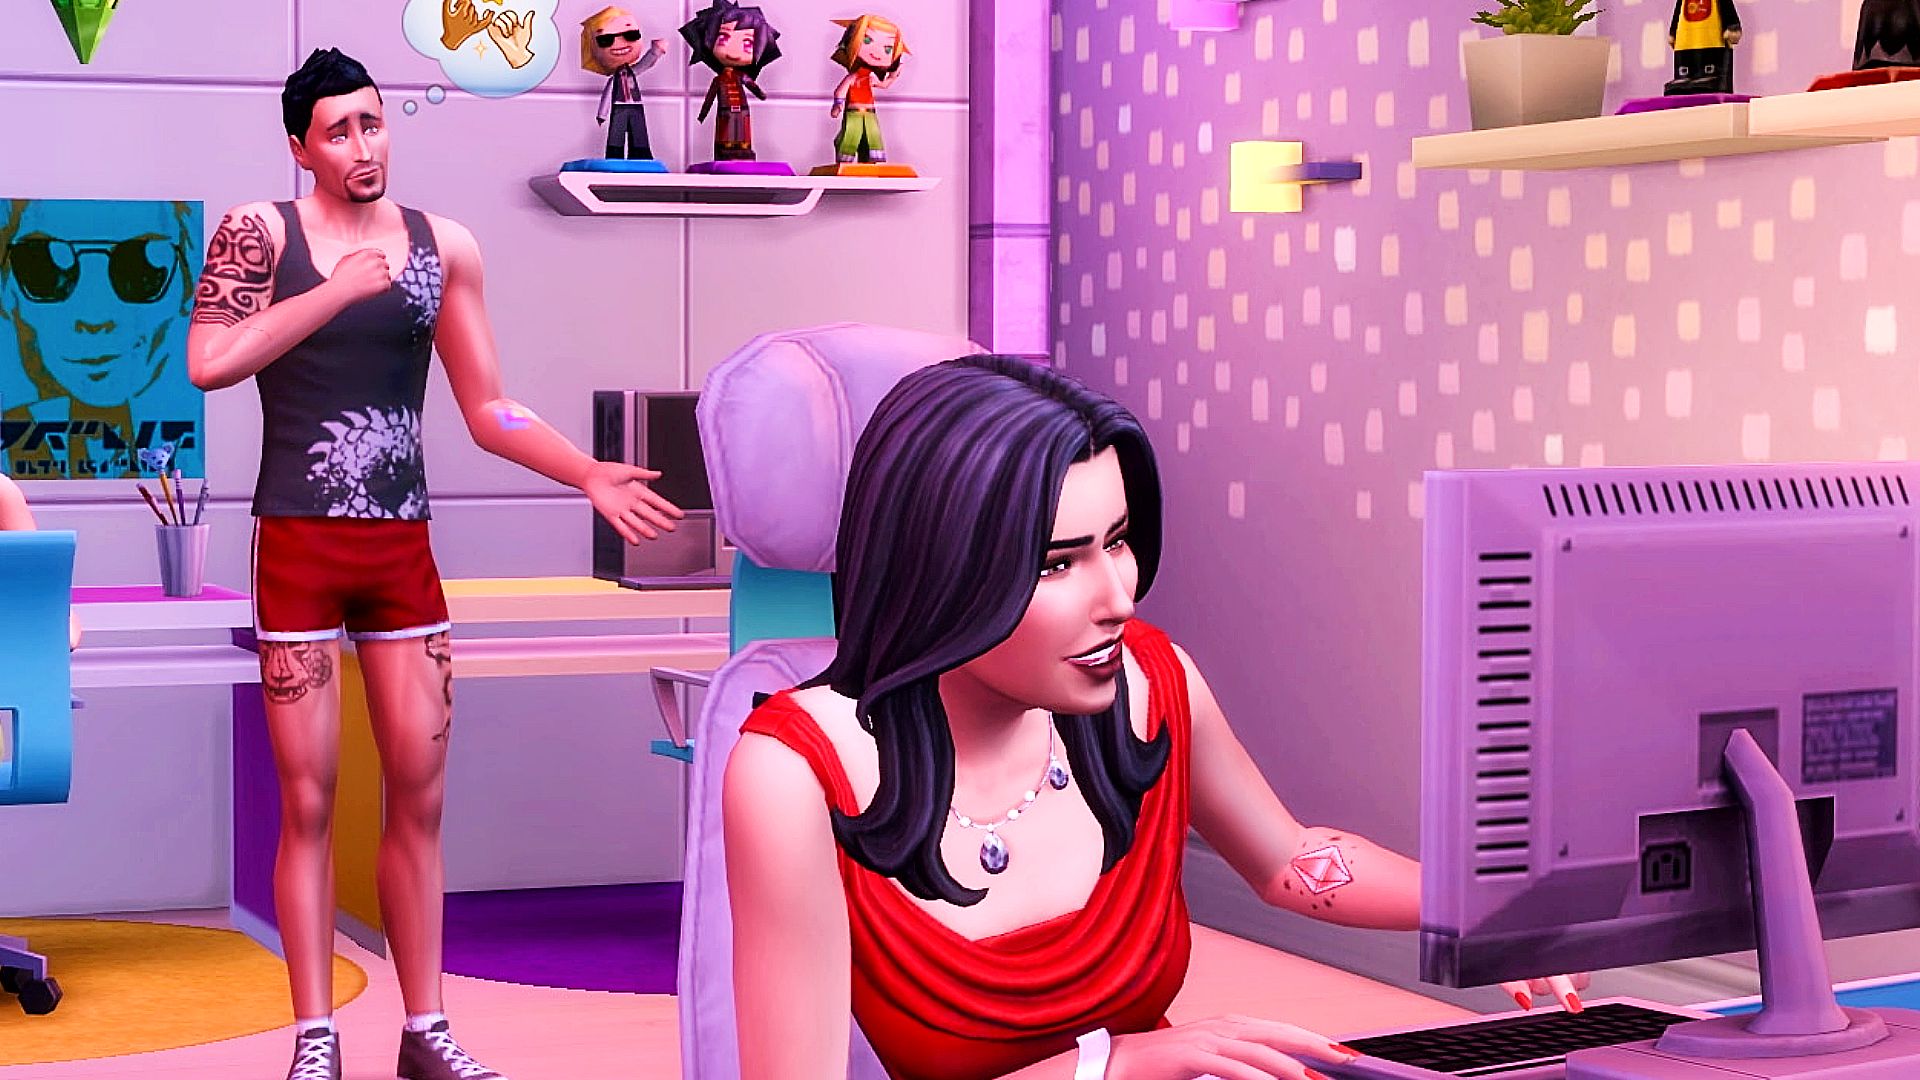 The Sims 5 will be free-to-play - IG News